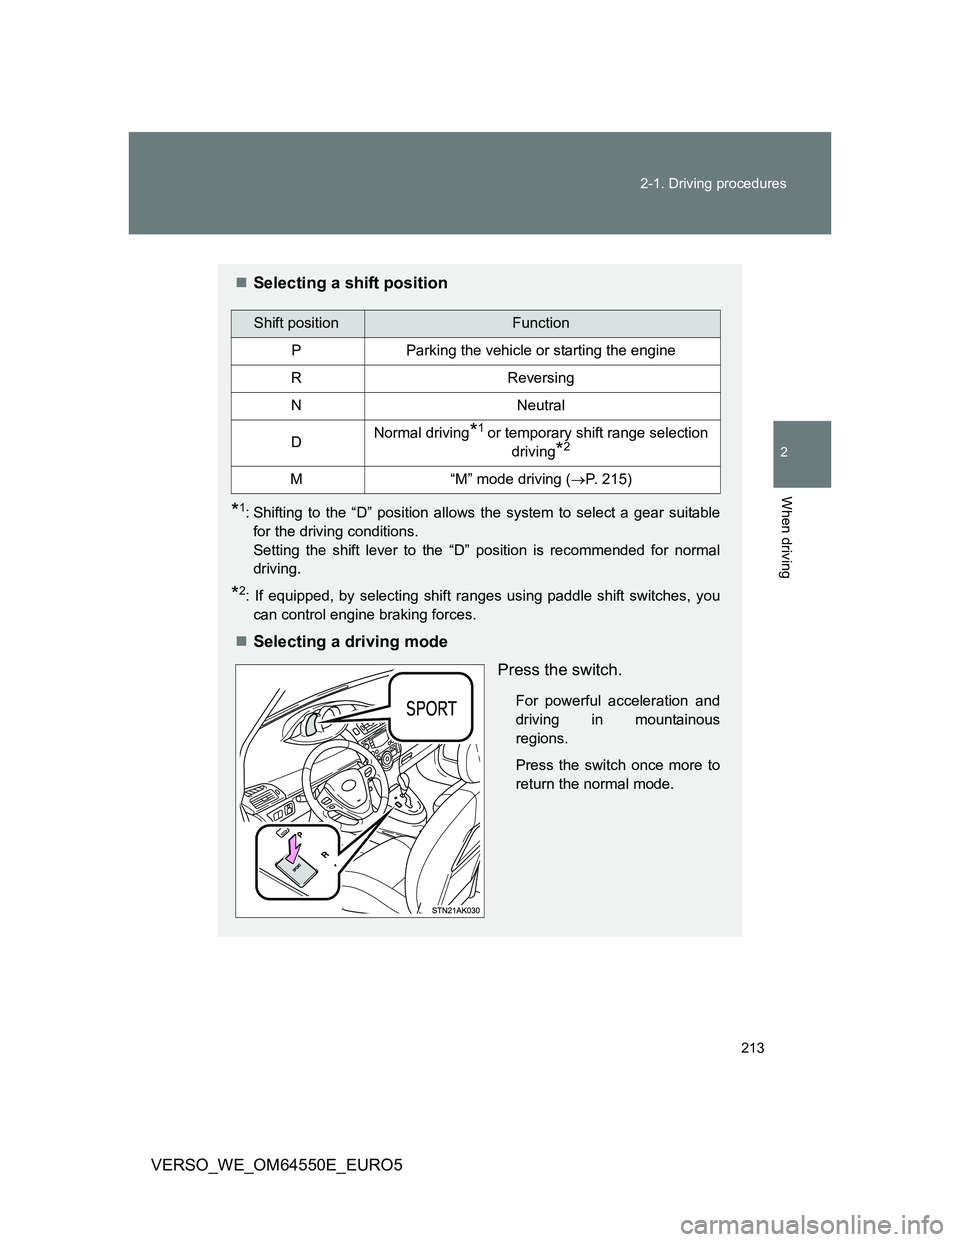 TOYOTA VERSO 2013  Owners Manual 213 2-1. Driving procedures
2
When driving
VERSO_WE_OM64550E_EURO5
Selecting a shift position
*1: Shifting to the “D” position allows the system to select a gear suitable
for the driving condit